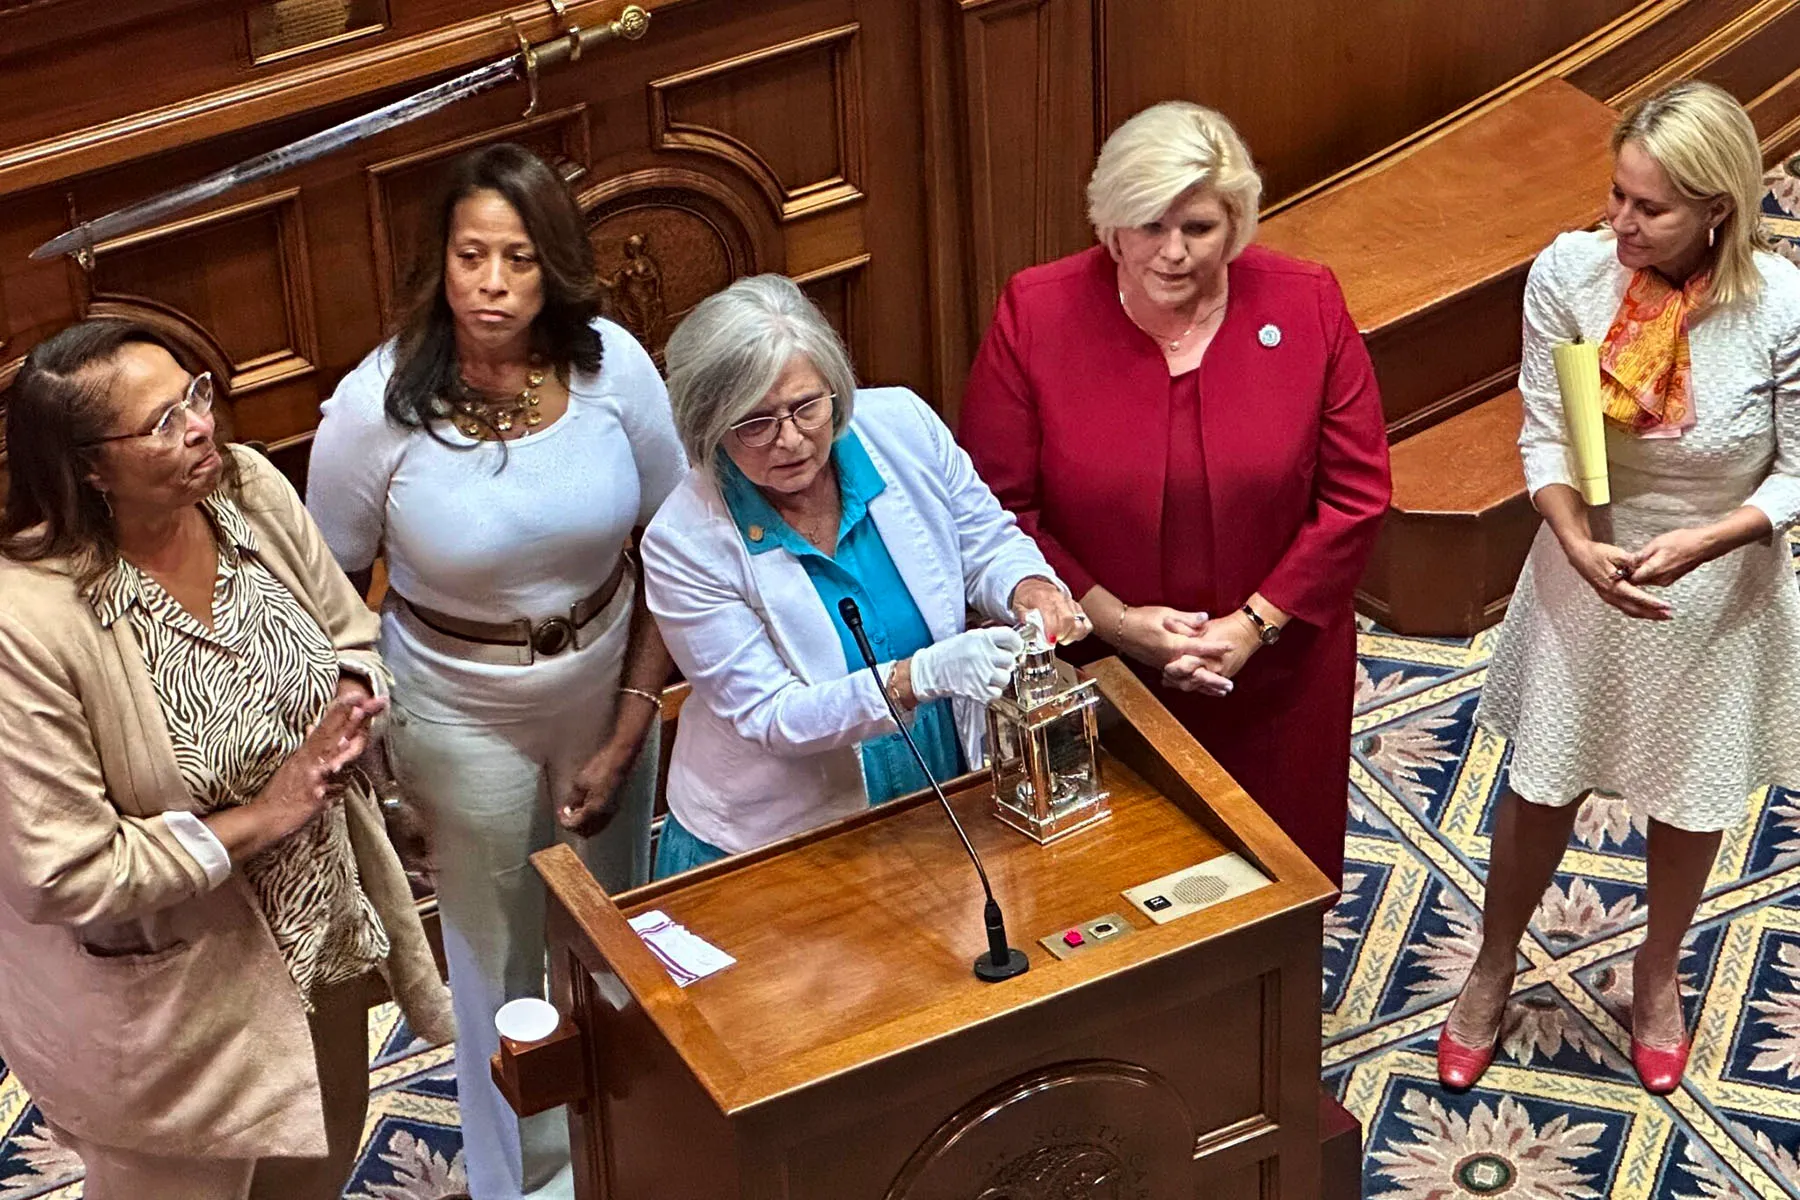 Sen. Katrina Shealy holds up the John F. Kennedy Profile in Courage Award given last fall to the five bipartisan “sister senators” who helped block a near-total abortion ban